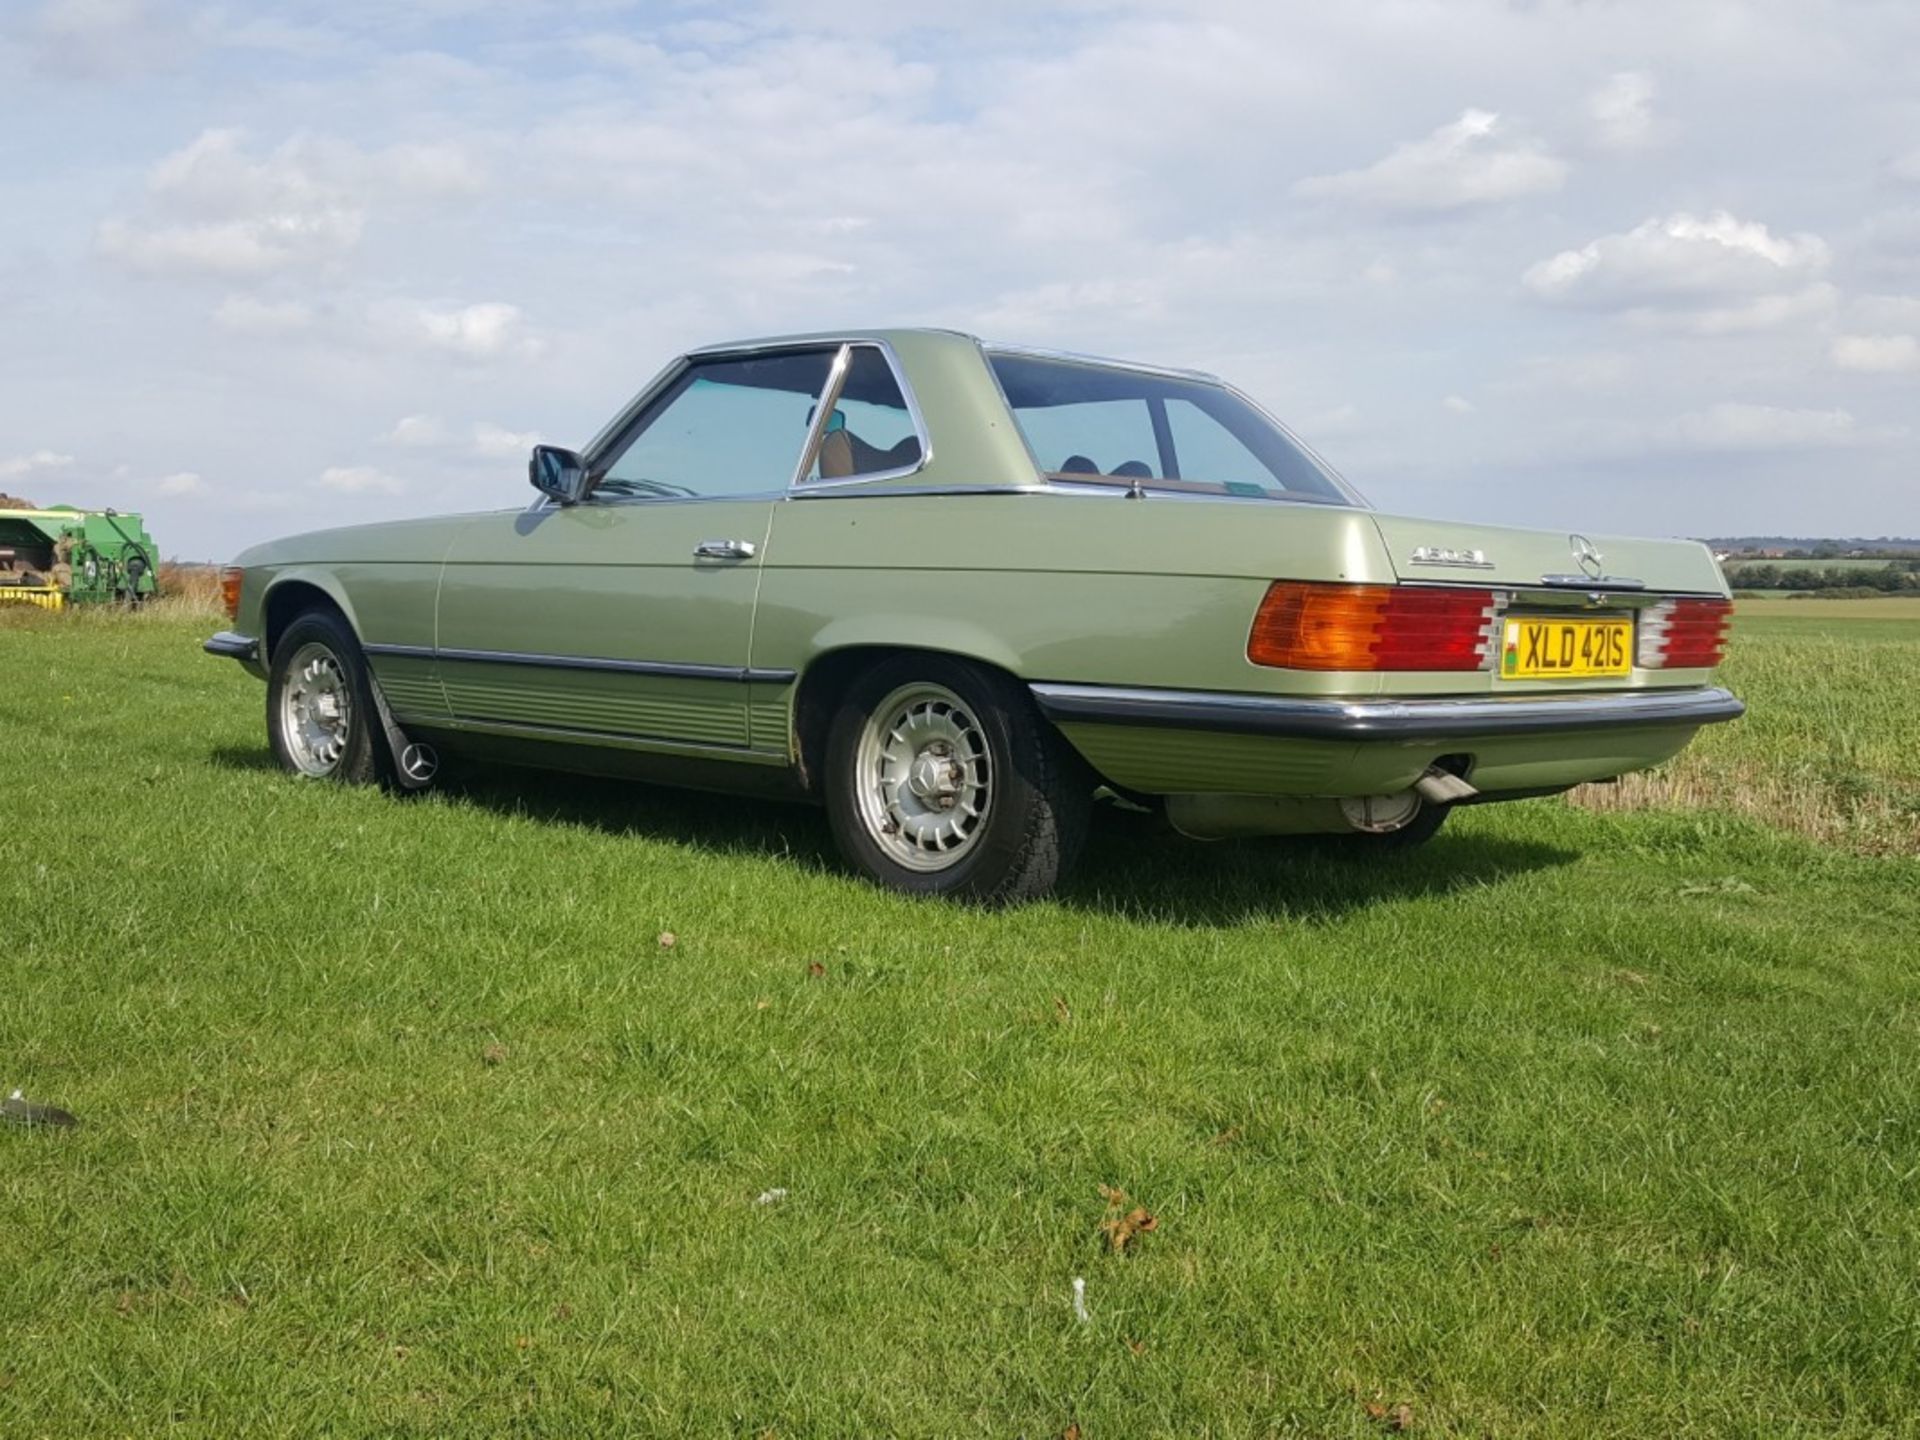 Mercedes 450SL Automatic 1978 - Image 7 of 12